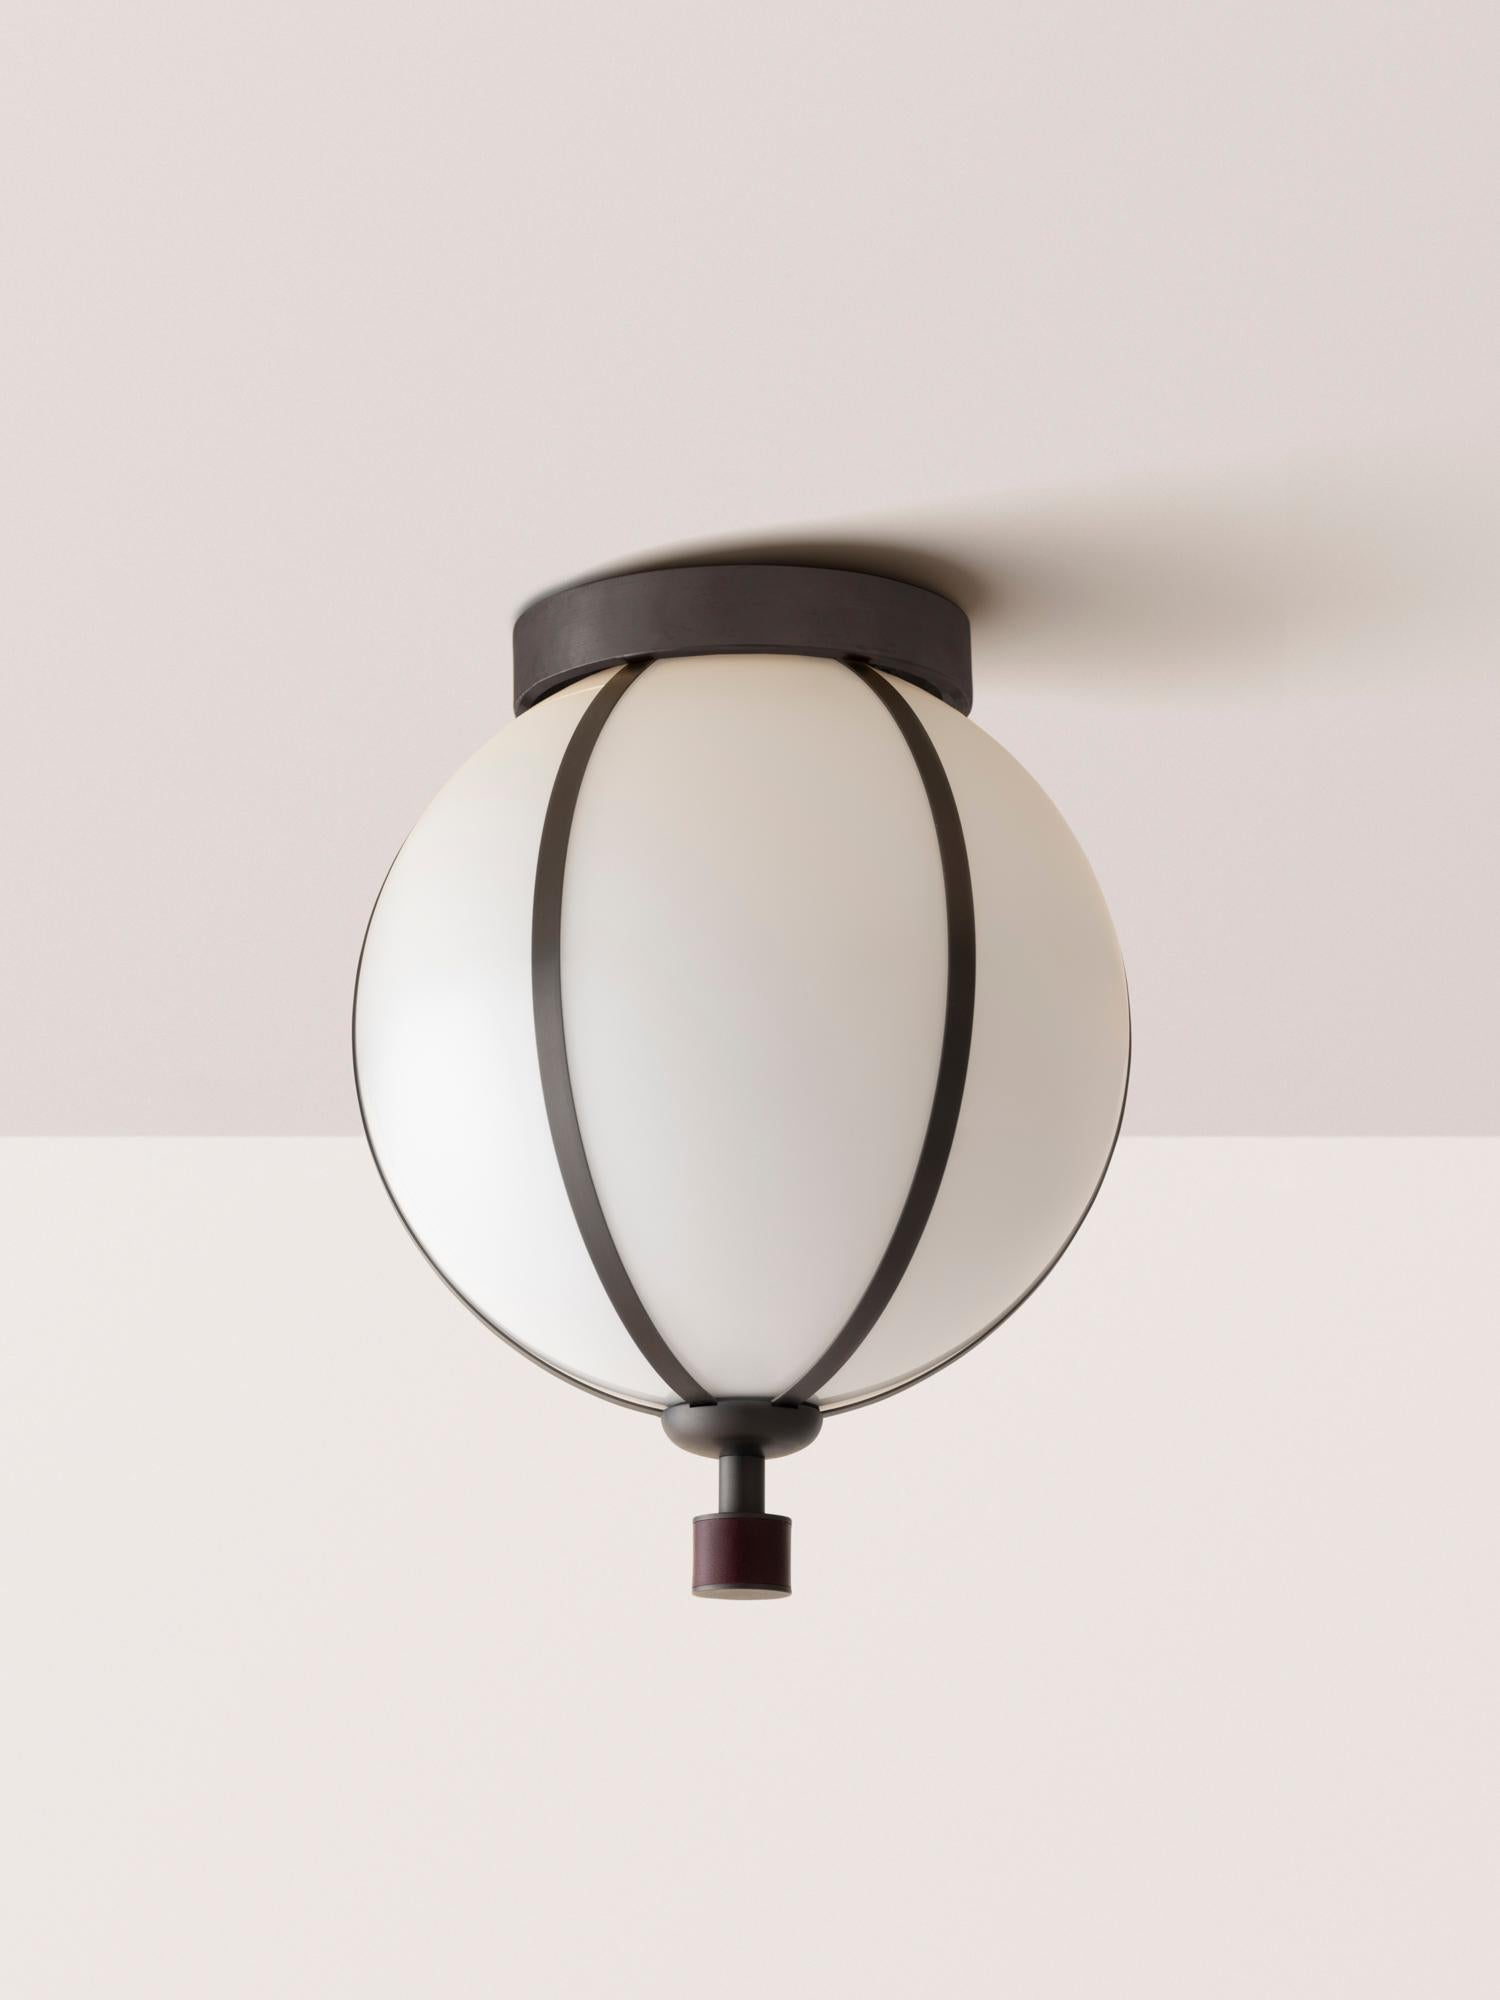 The Rib Flush Mount - Small Sphere is blown in Italy and delicately framed by thin brass ribs. A cylindrical brass finial, with optional hand-wrapped leather or suede, elongates the fixture and adds a finishing touch of refinement.

This listing is